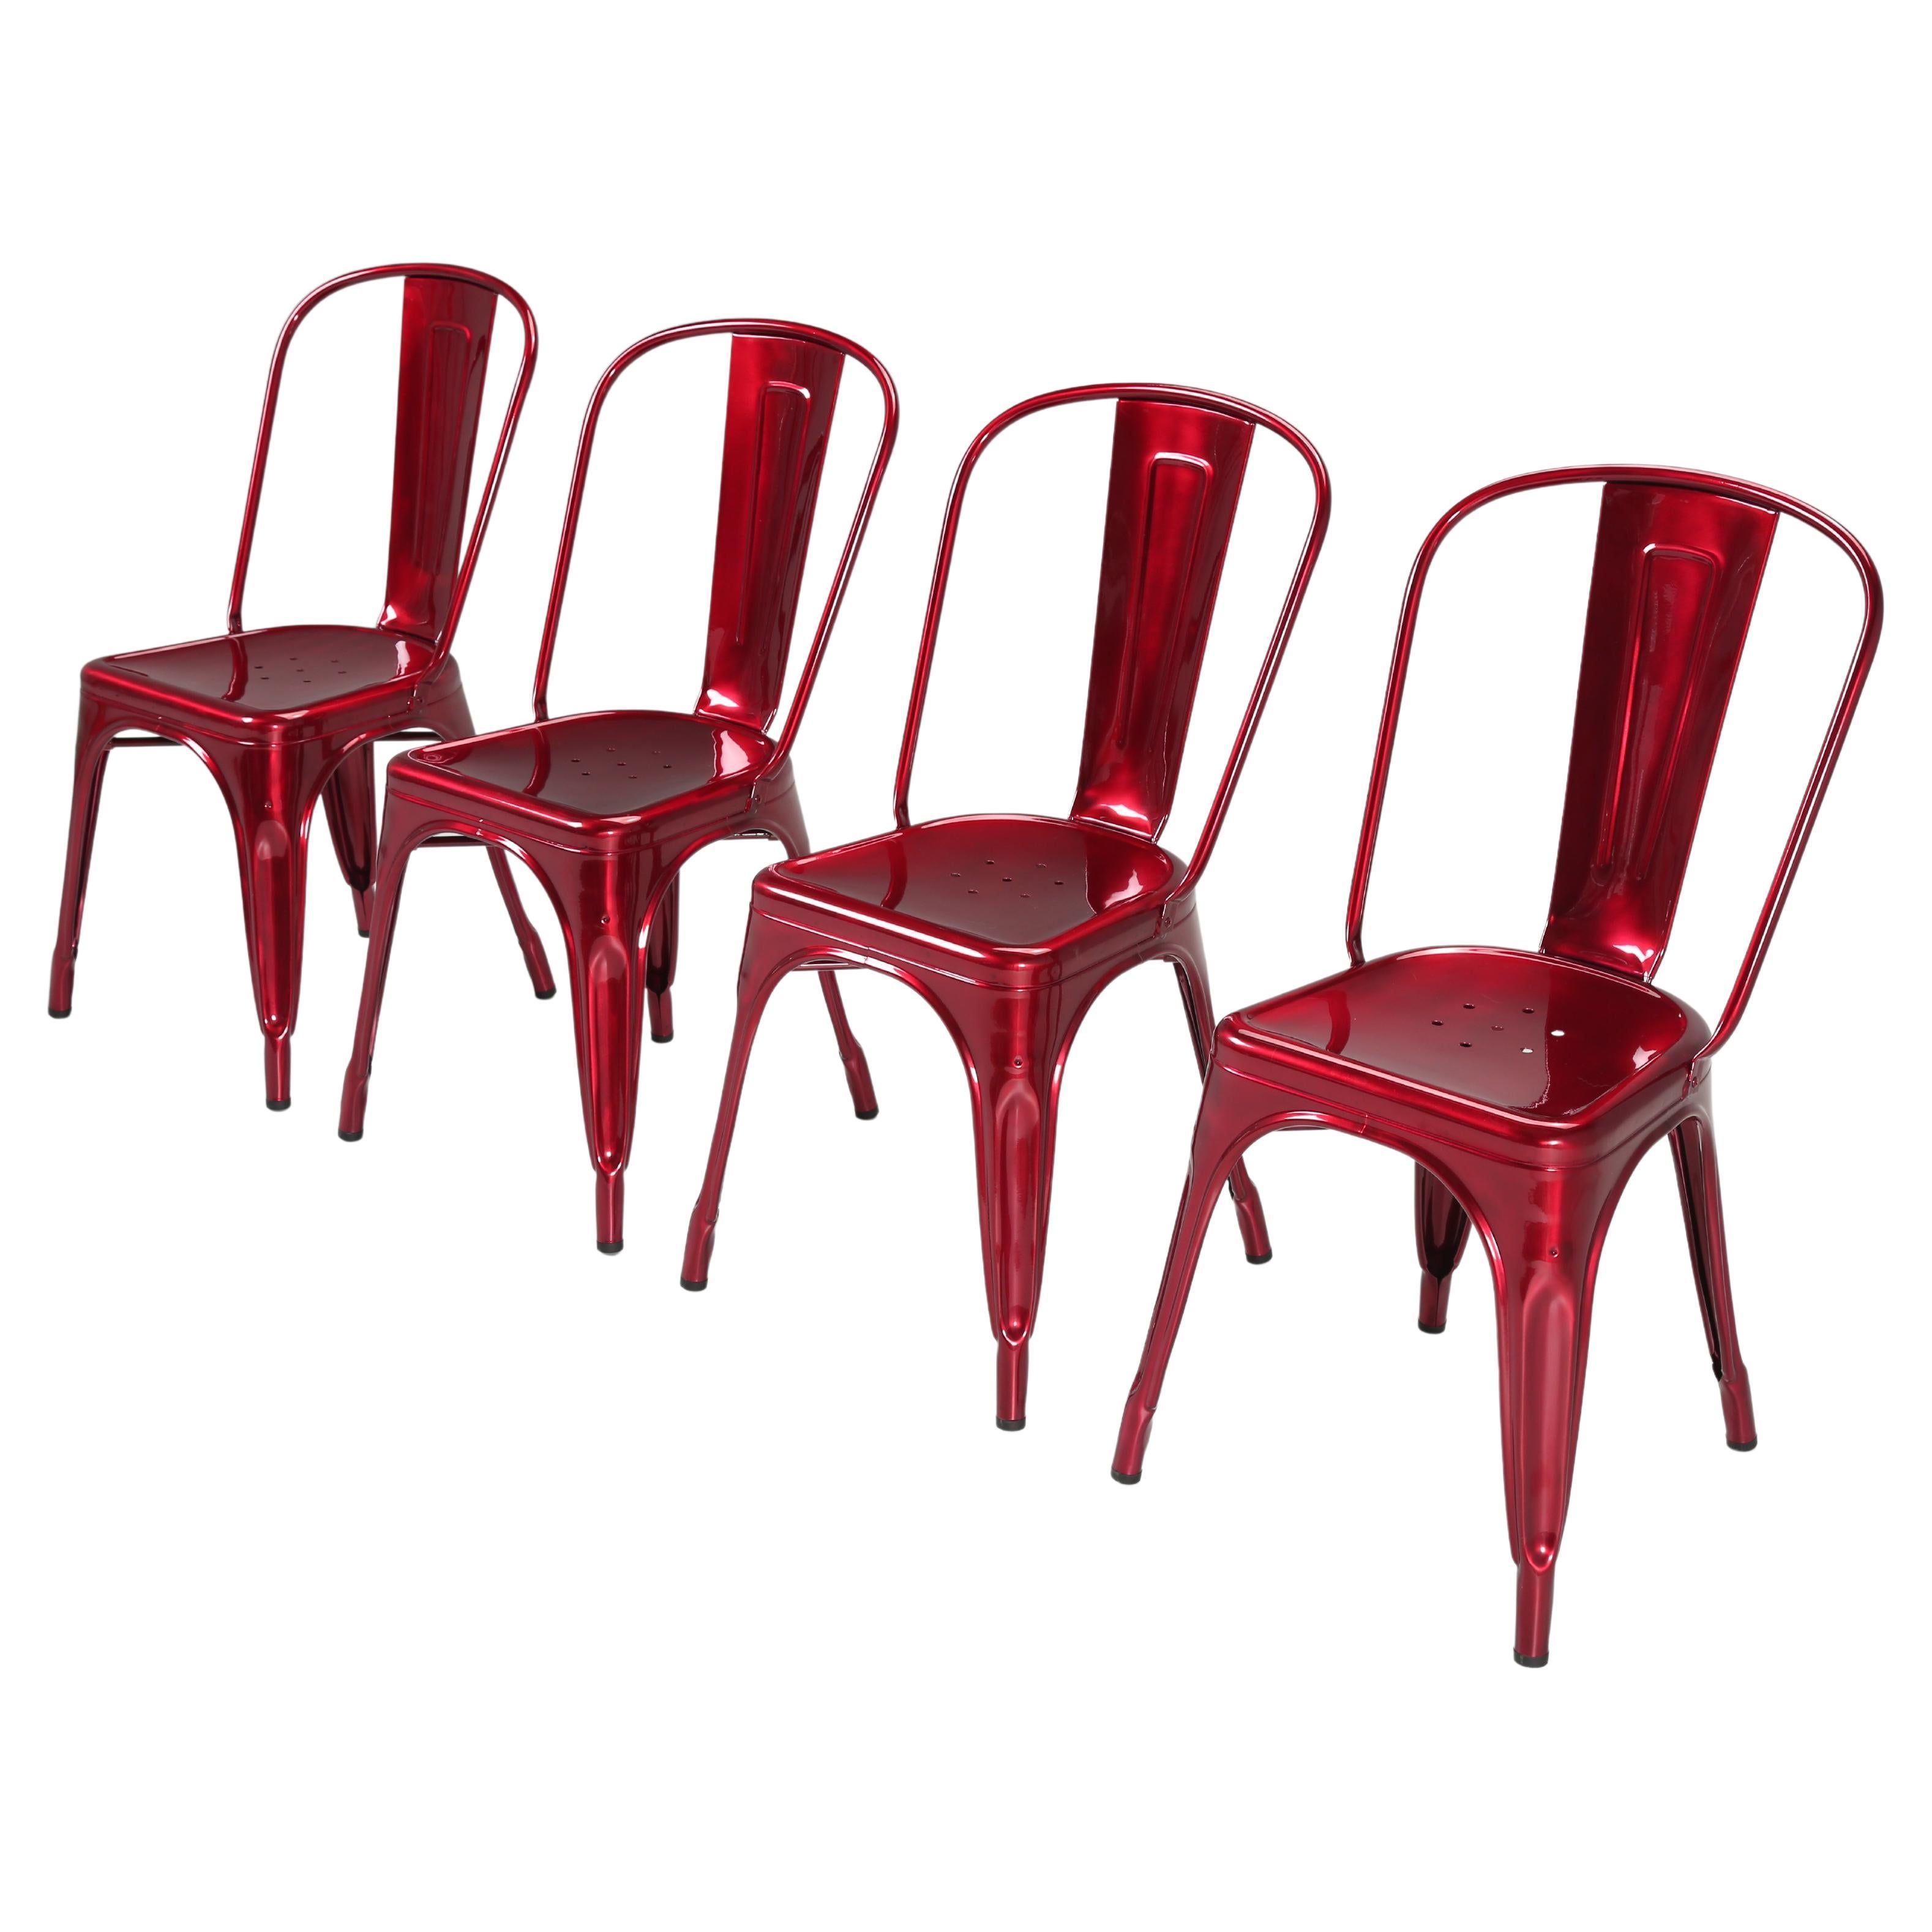 Tolix Set of (4) Steel Stacking Chairs in a Brilliant Candy Apple Red Metallic